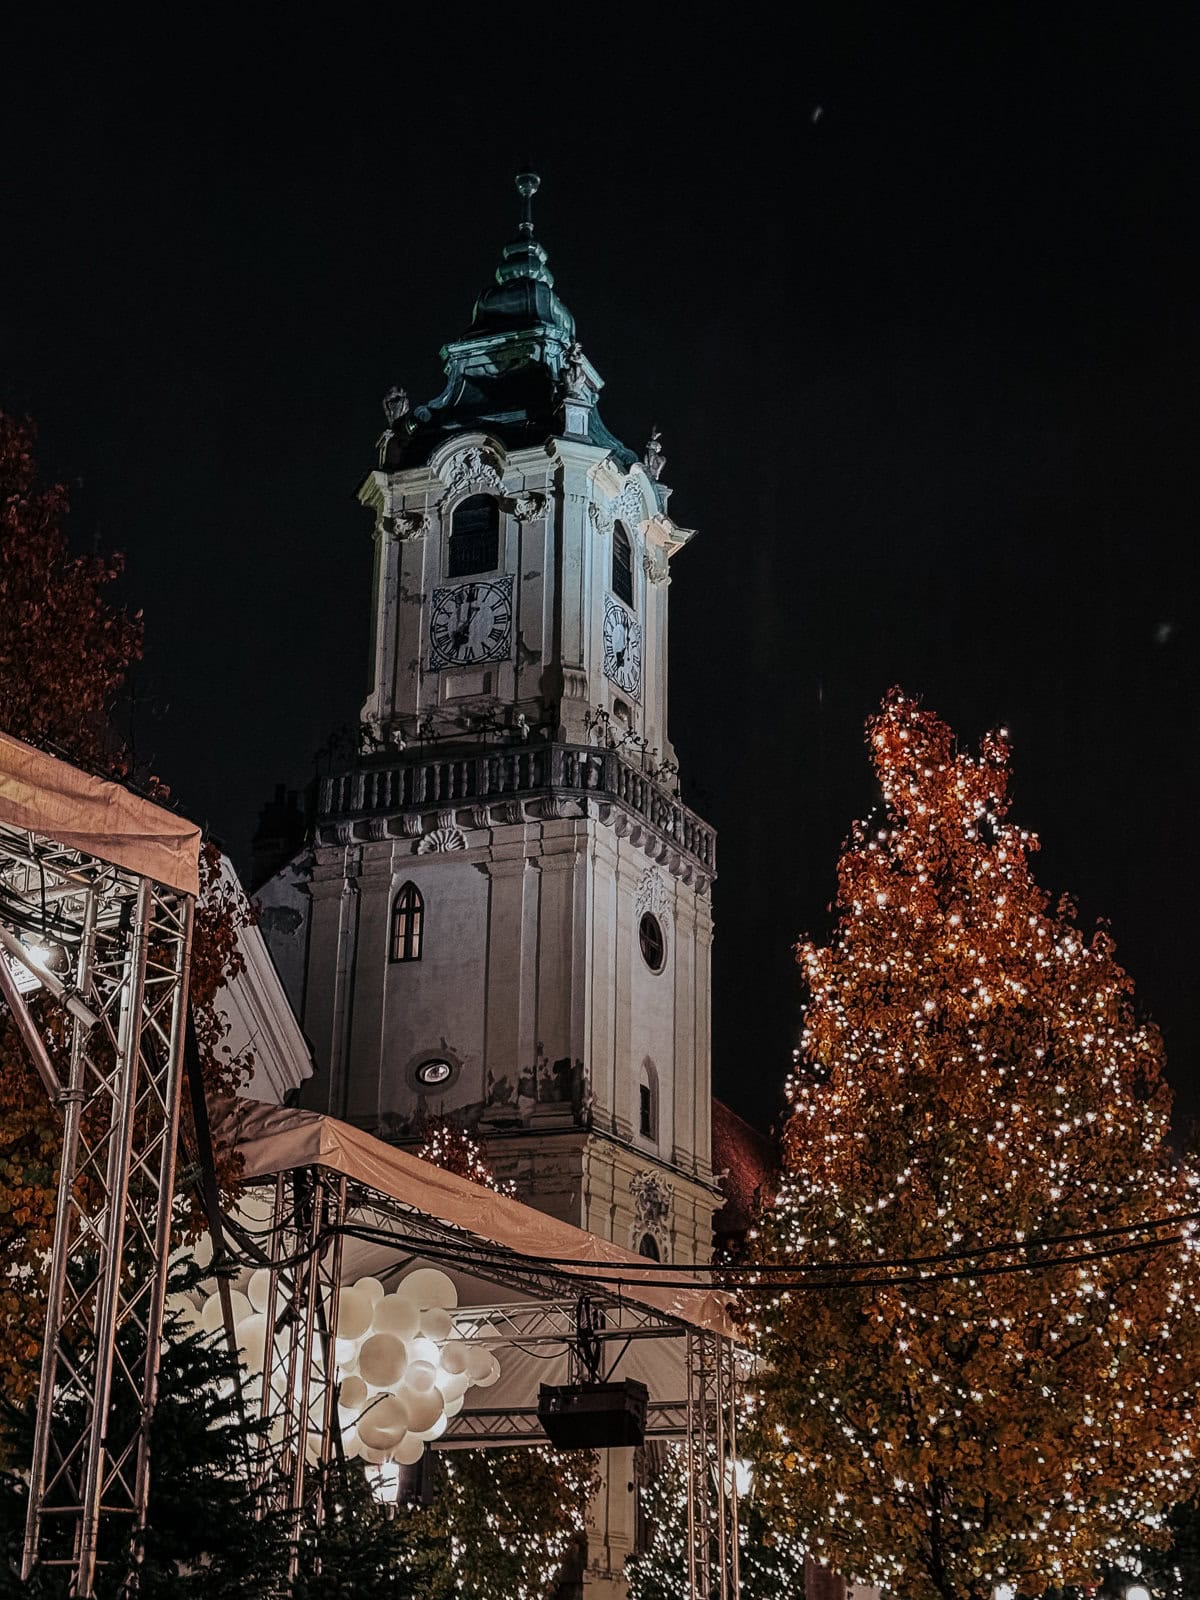 A close-up of a church tower lit against the night sky, framed by festive decorations and glowing trees, capturing the serene ambiance of a Christmas market.